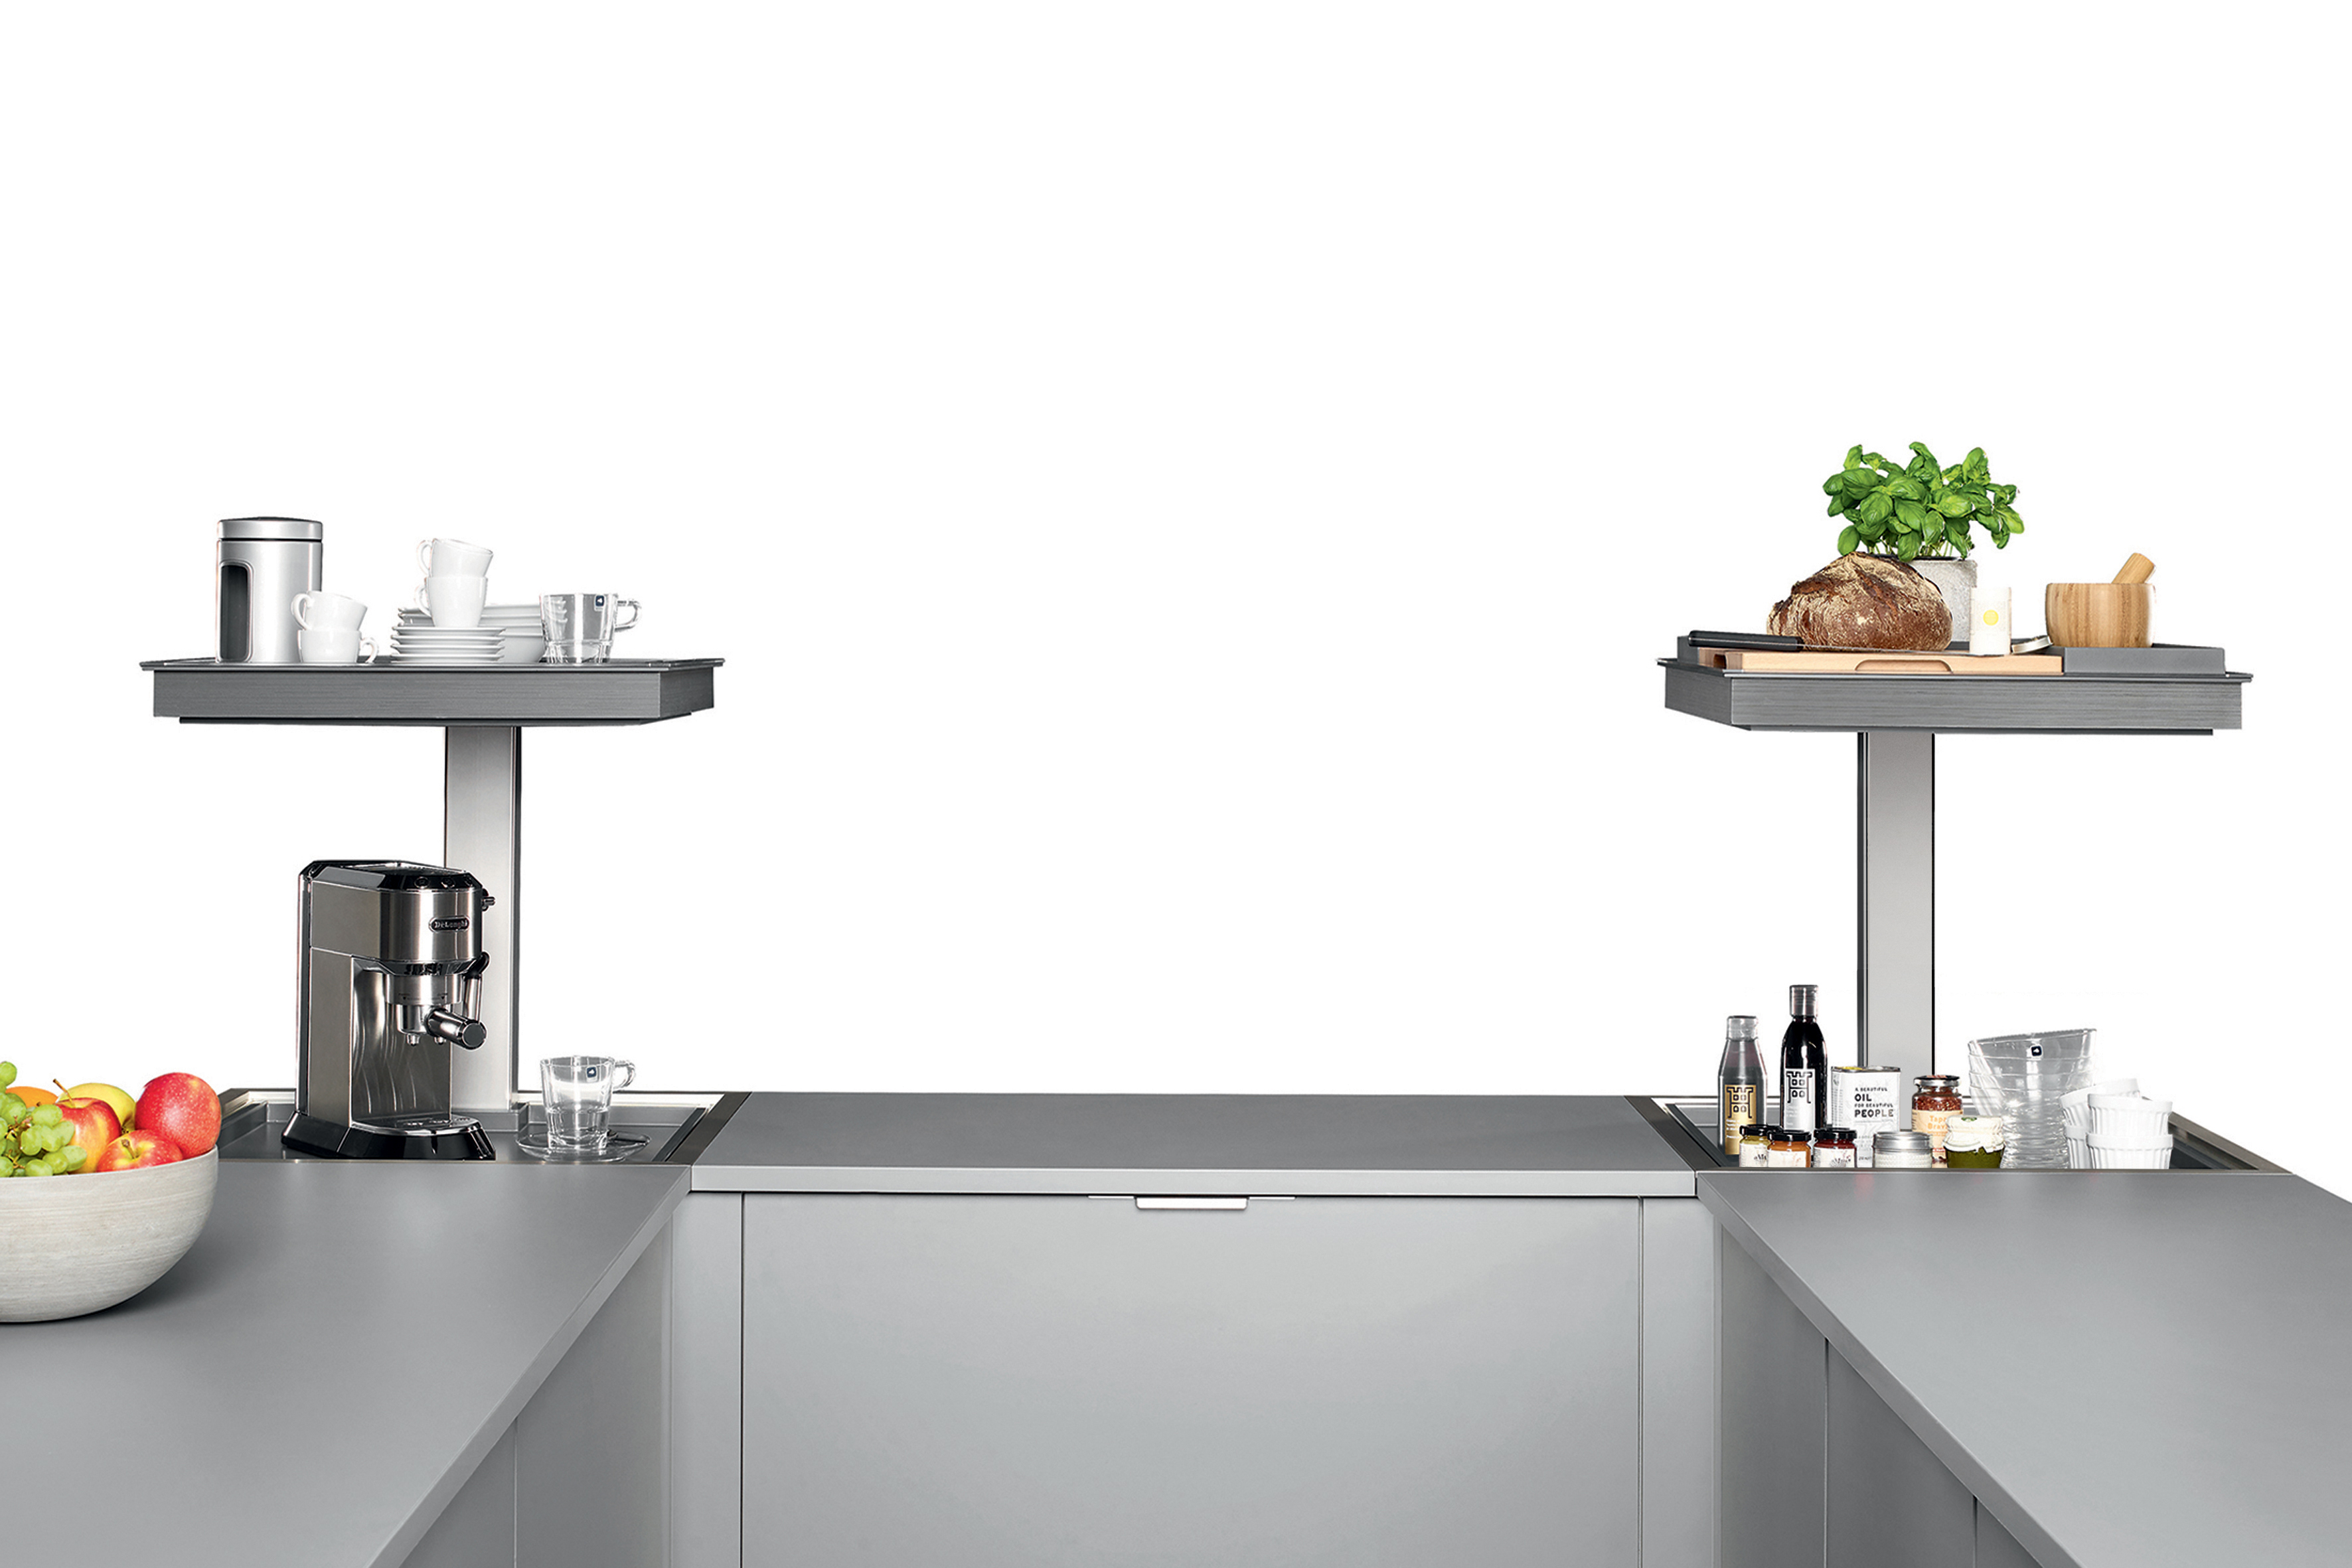 This Electric Lift-Up System Adds Ergonomic Storage to the Kitchen